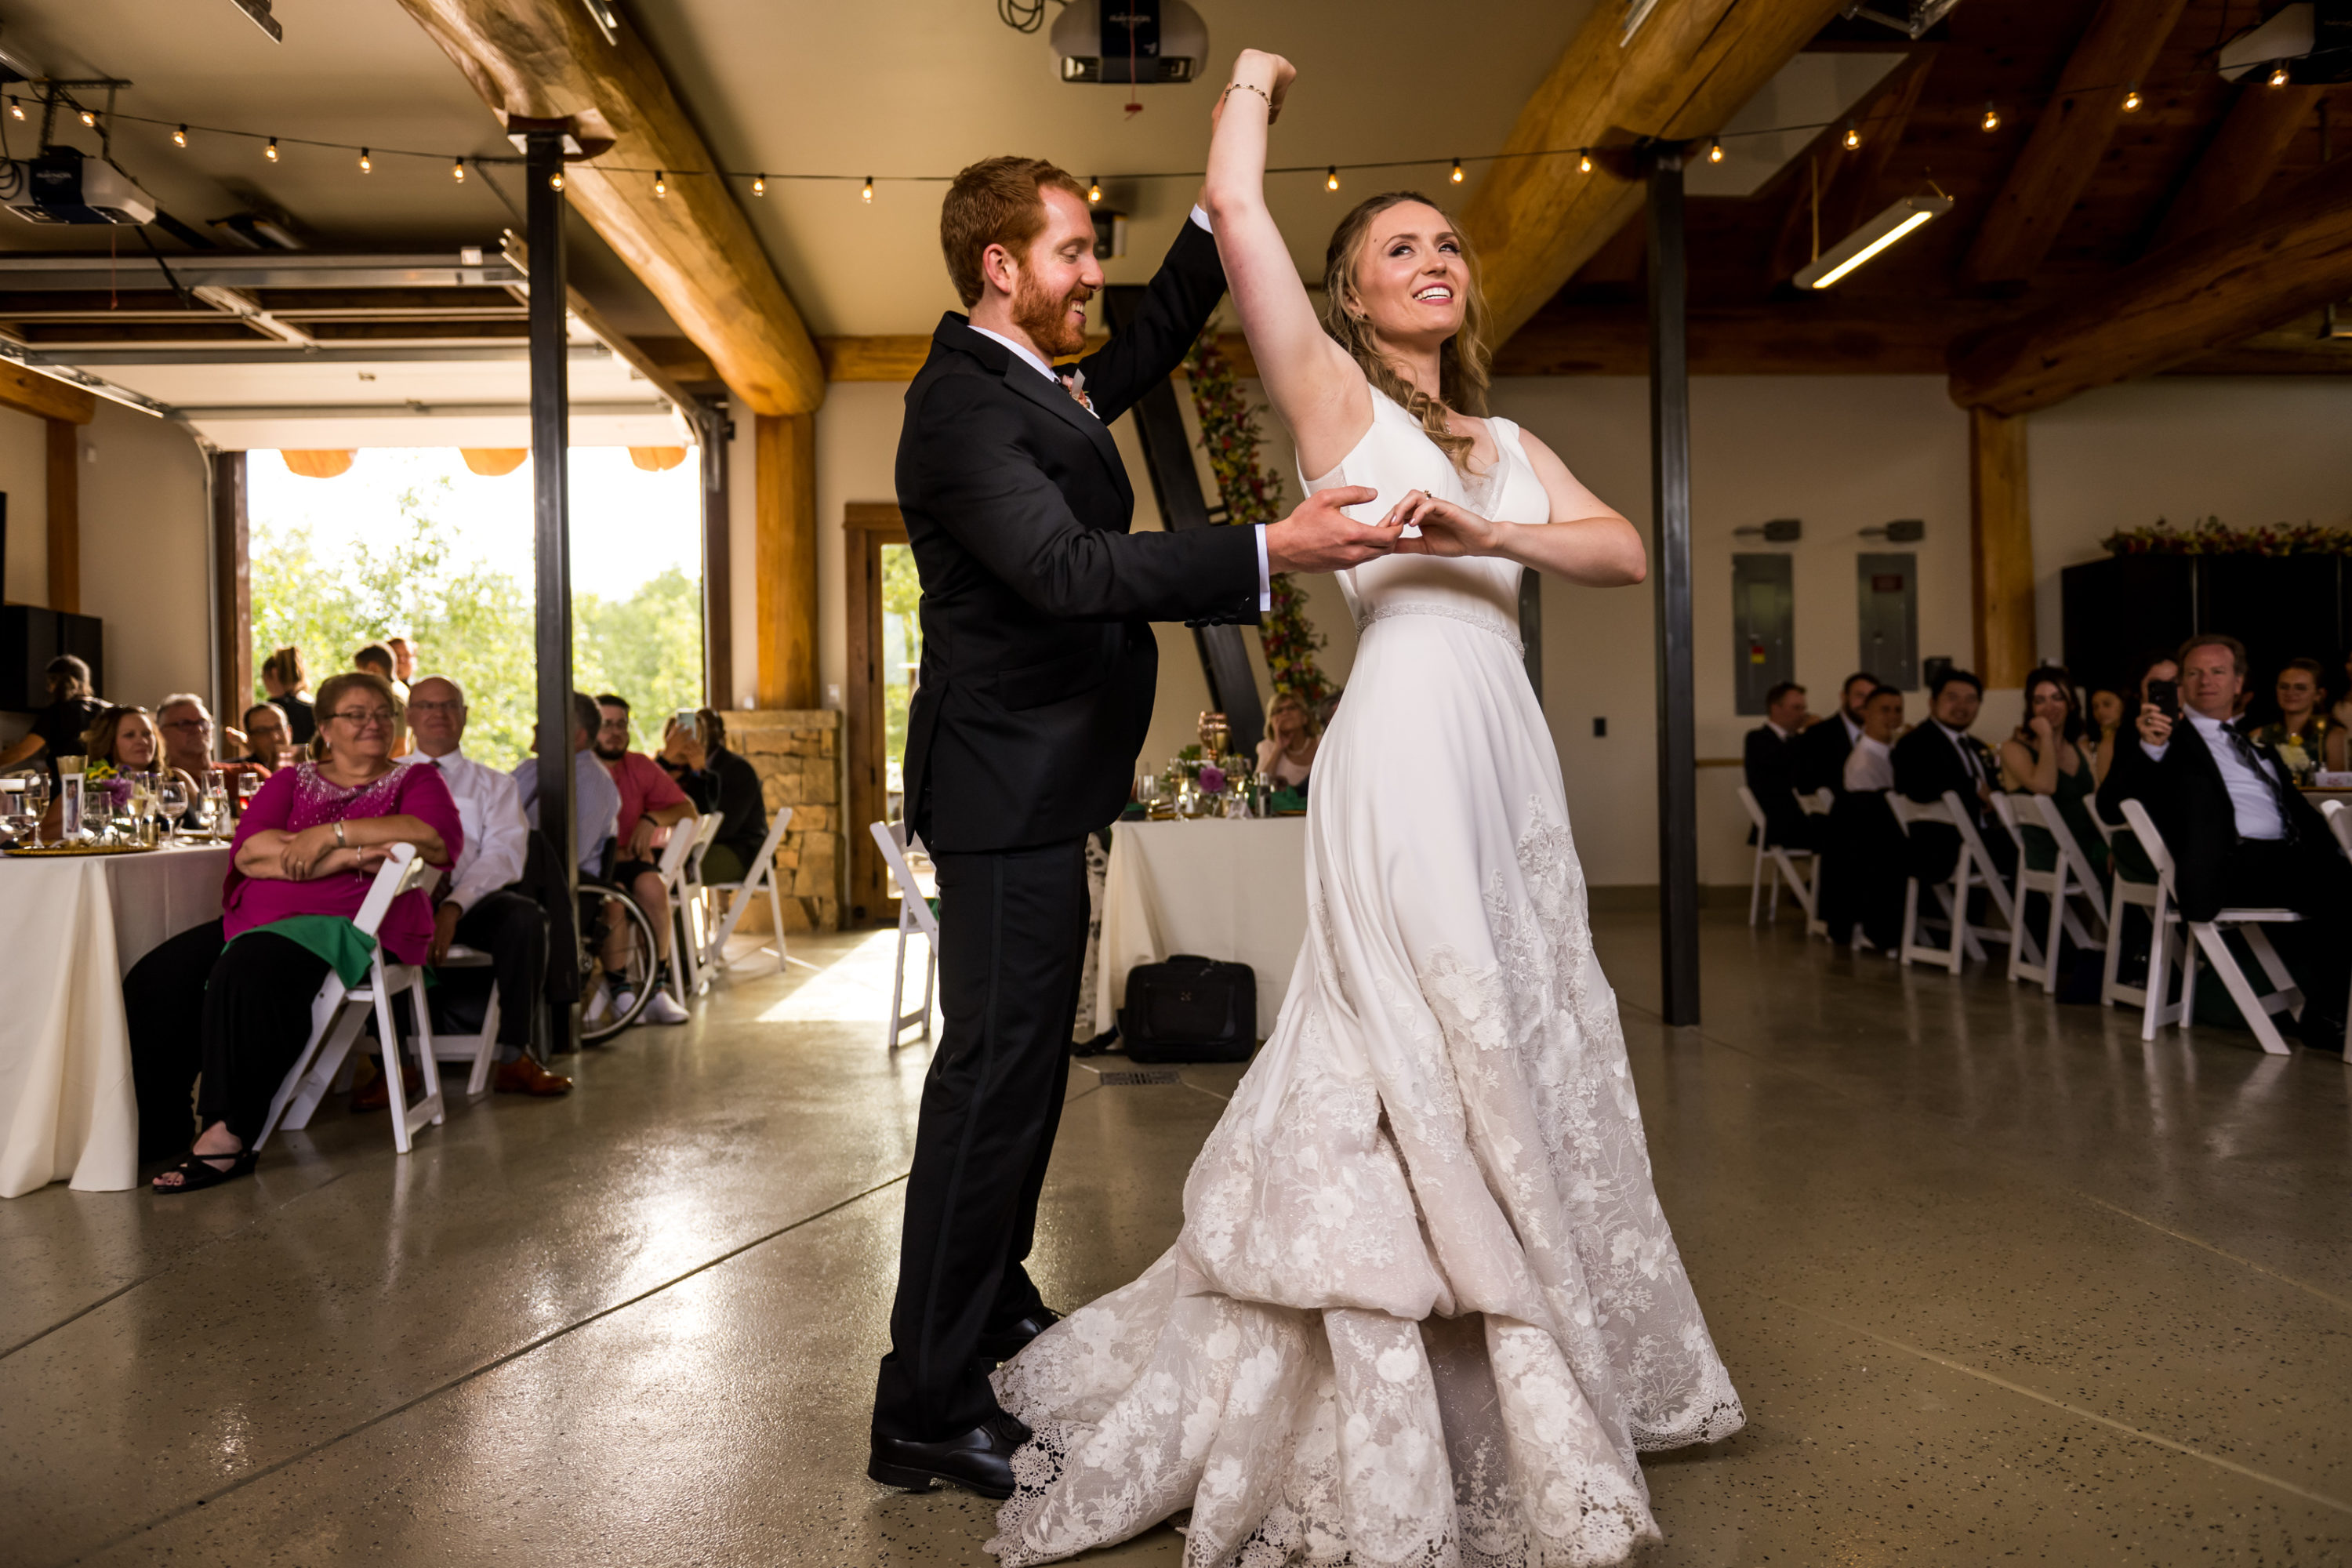 The bride and groom dance during their Telluride, Colorado wedding.